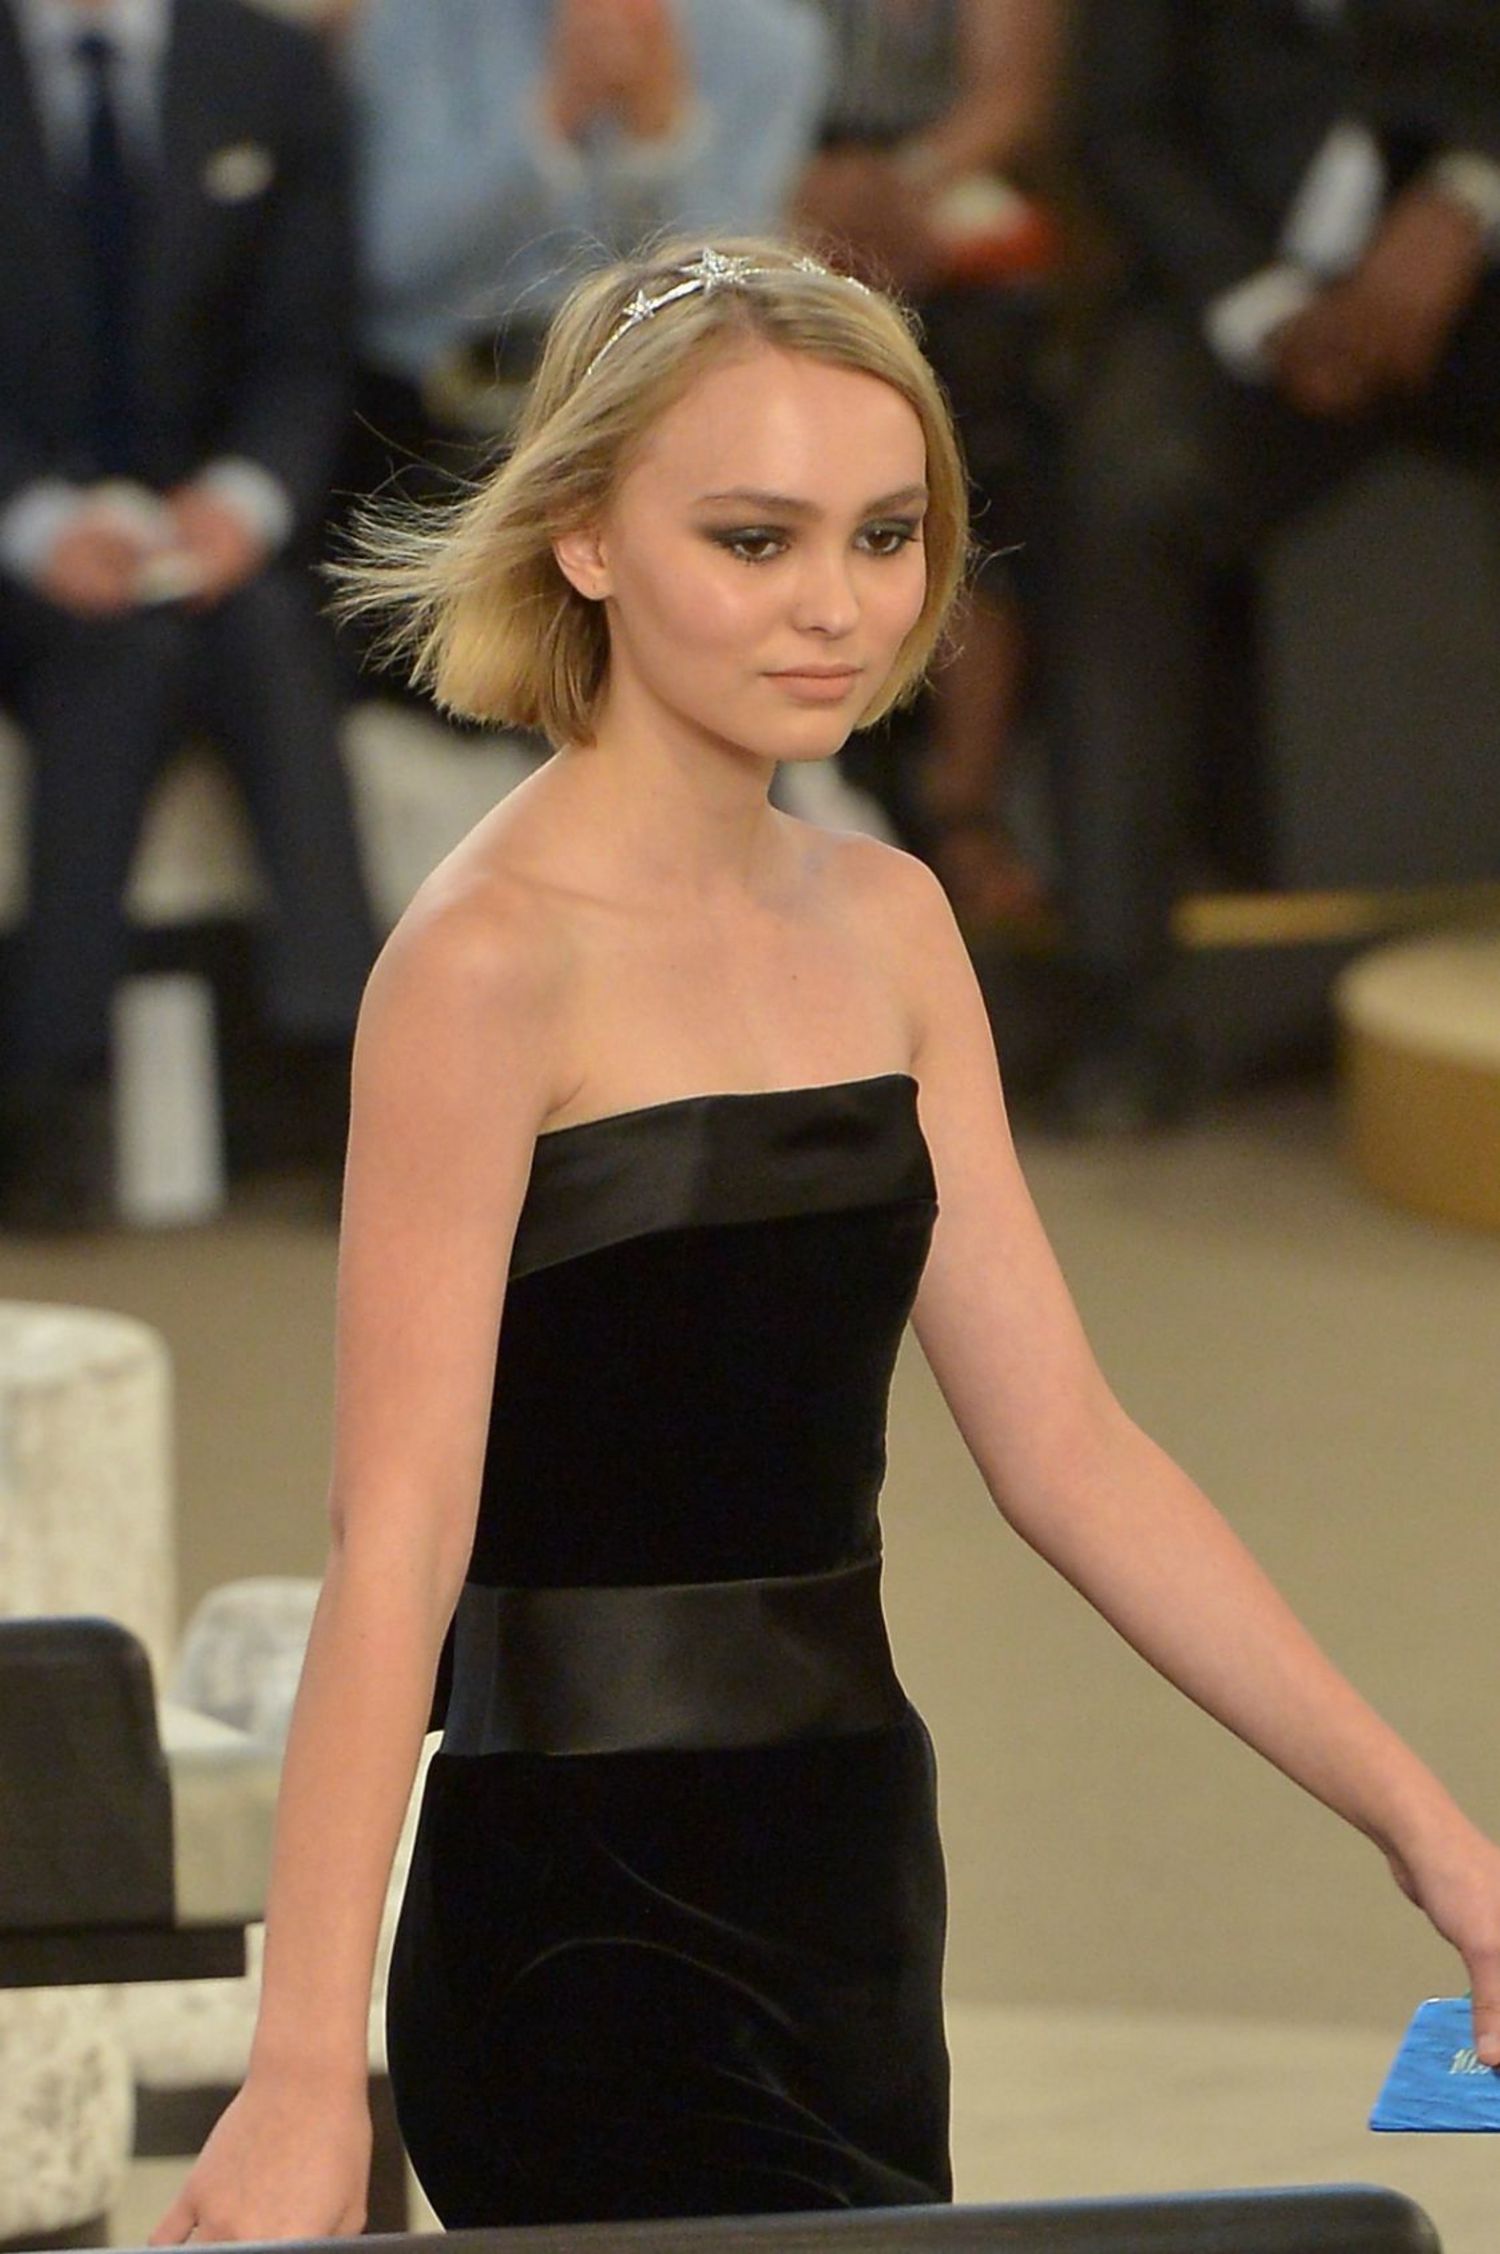 Johnny Depp's Daughter Lily Rose Depp Will Star in Chanel Eyewear Ad Campaign